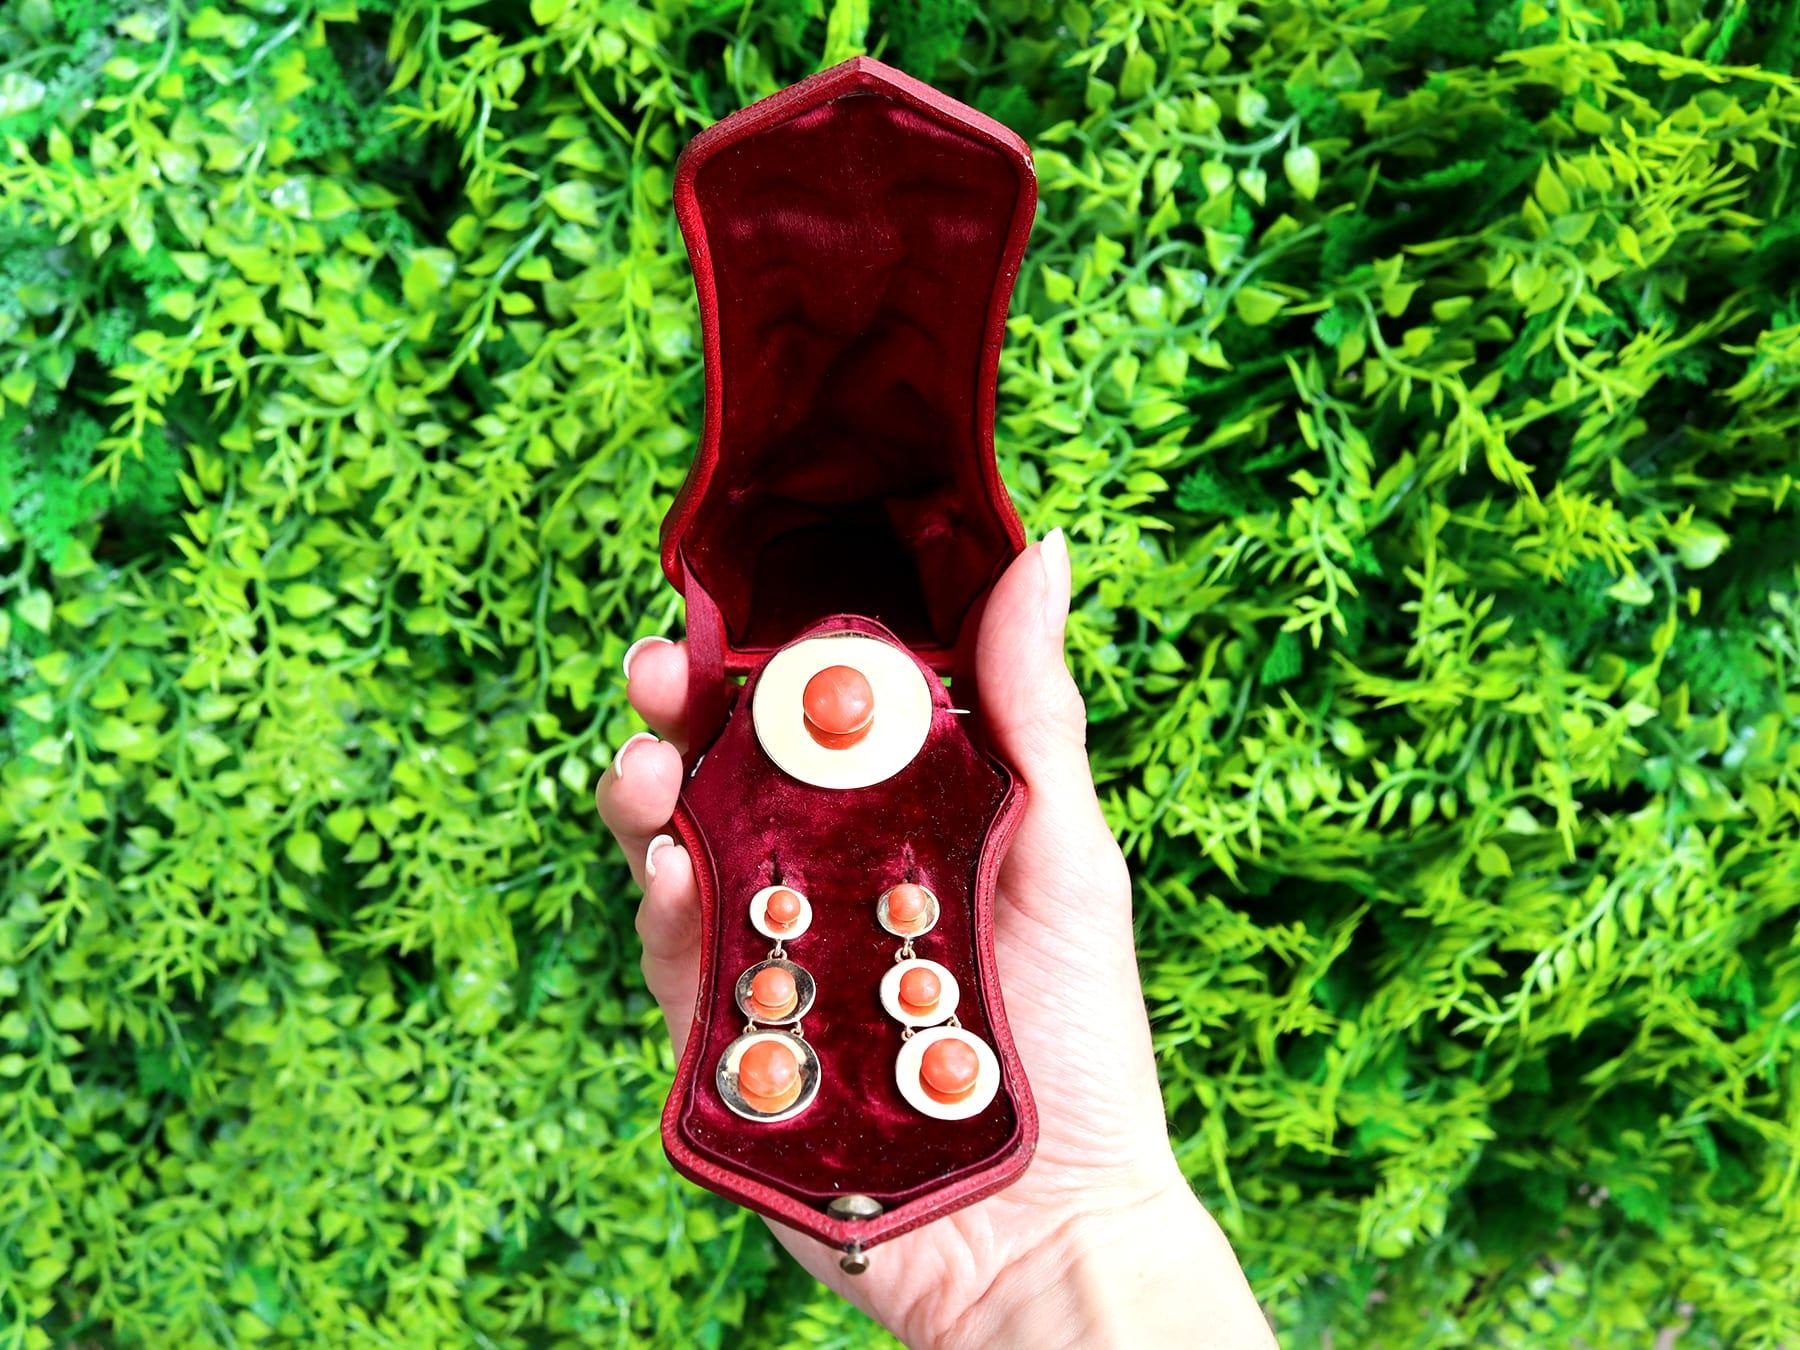 An impressive antique French red coral and 18 karat yellow gold jewelry suite composed of earrings and brooch; part of our diverse antique jewelry collections.

This fine and impressive antique coral jewelry set, consisting of a brooch and matching